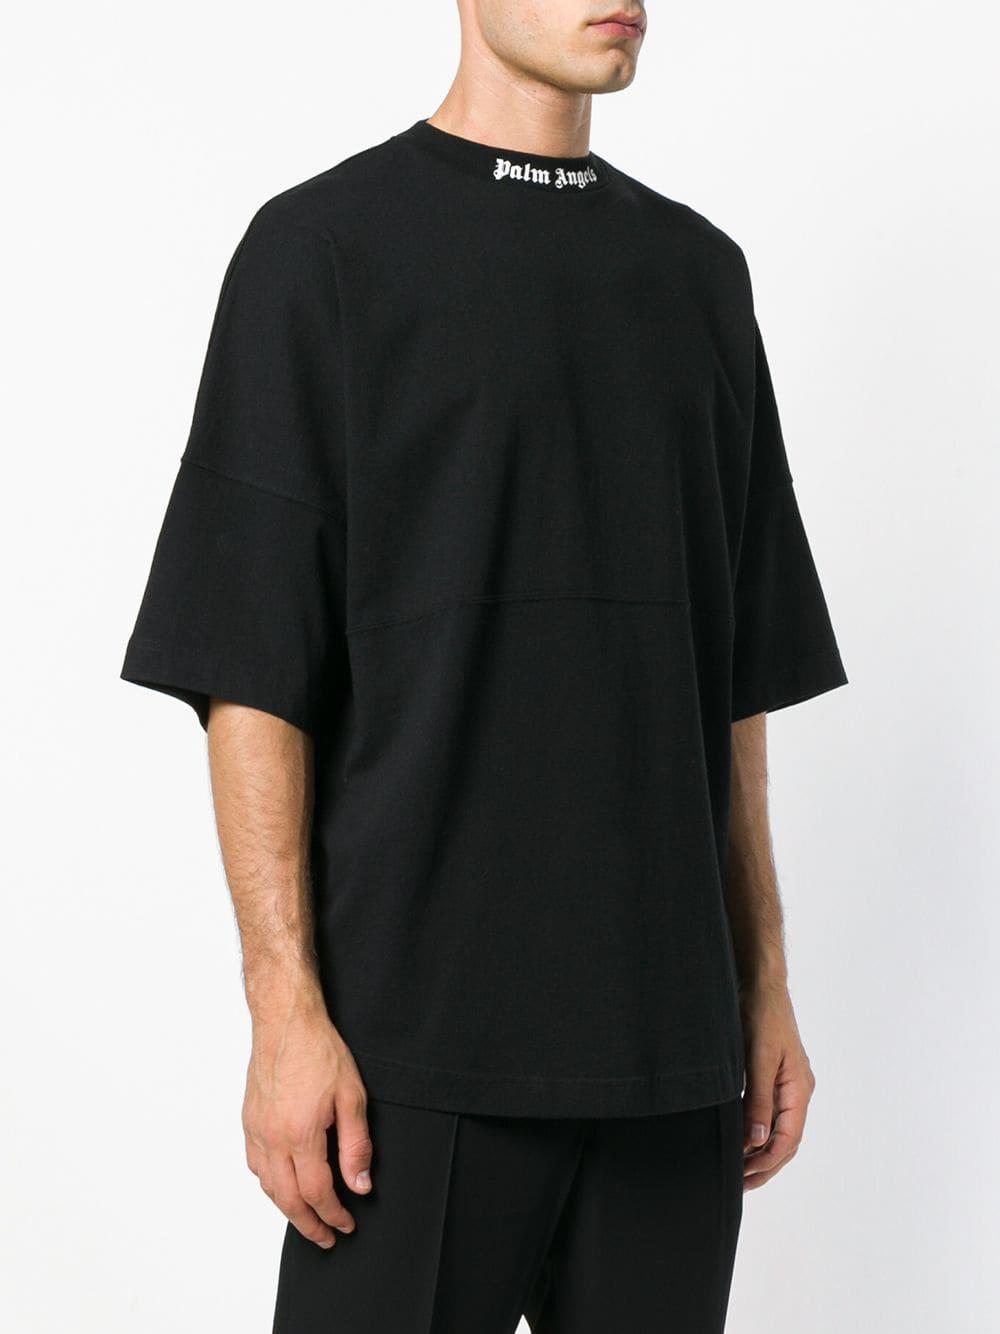 Palm Angels Oversize Tee Flash Sales ...